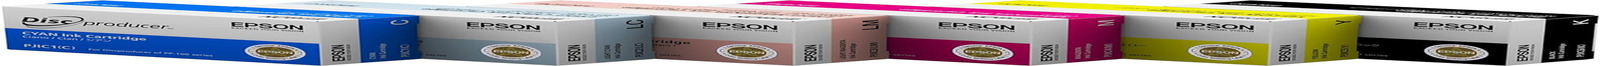 Epson Discproducer PP-100 Ink Cartridge 6 Color Set in Retail Packaging